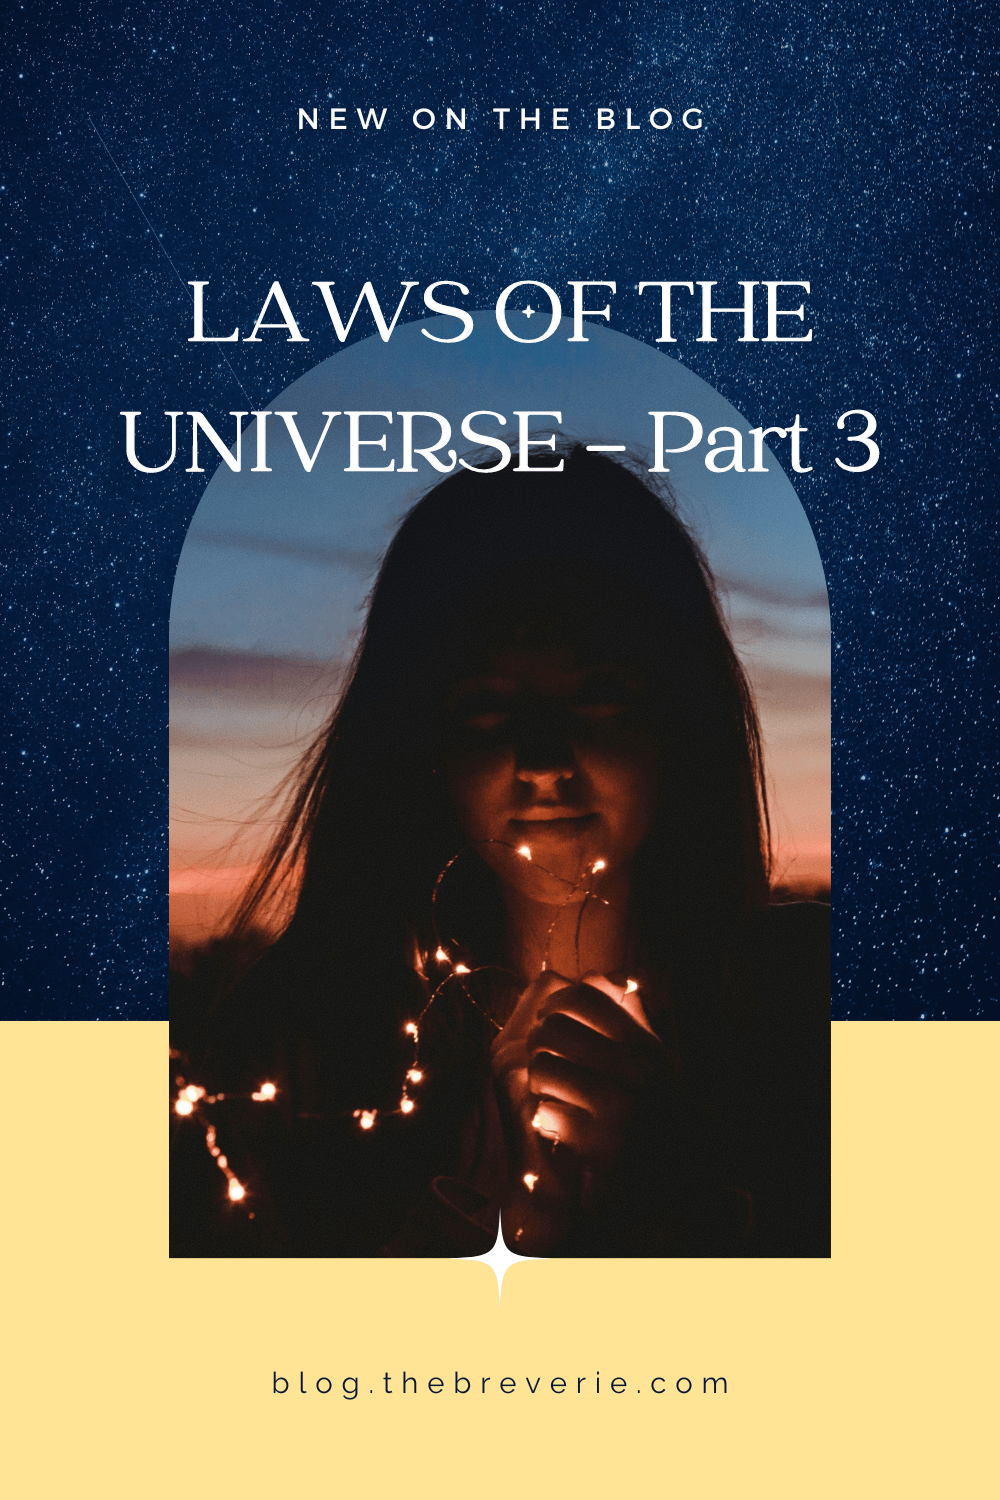 Laws of the Universe - Part 3 - Breverie Blog